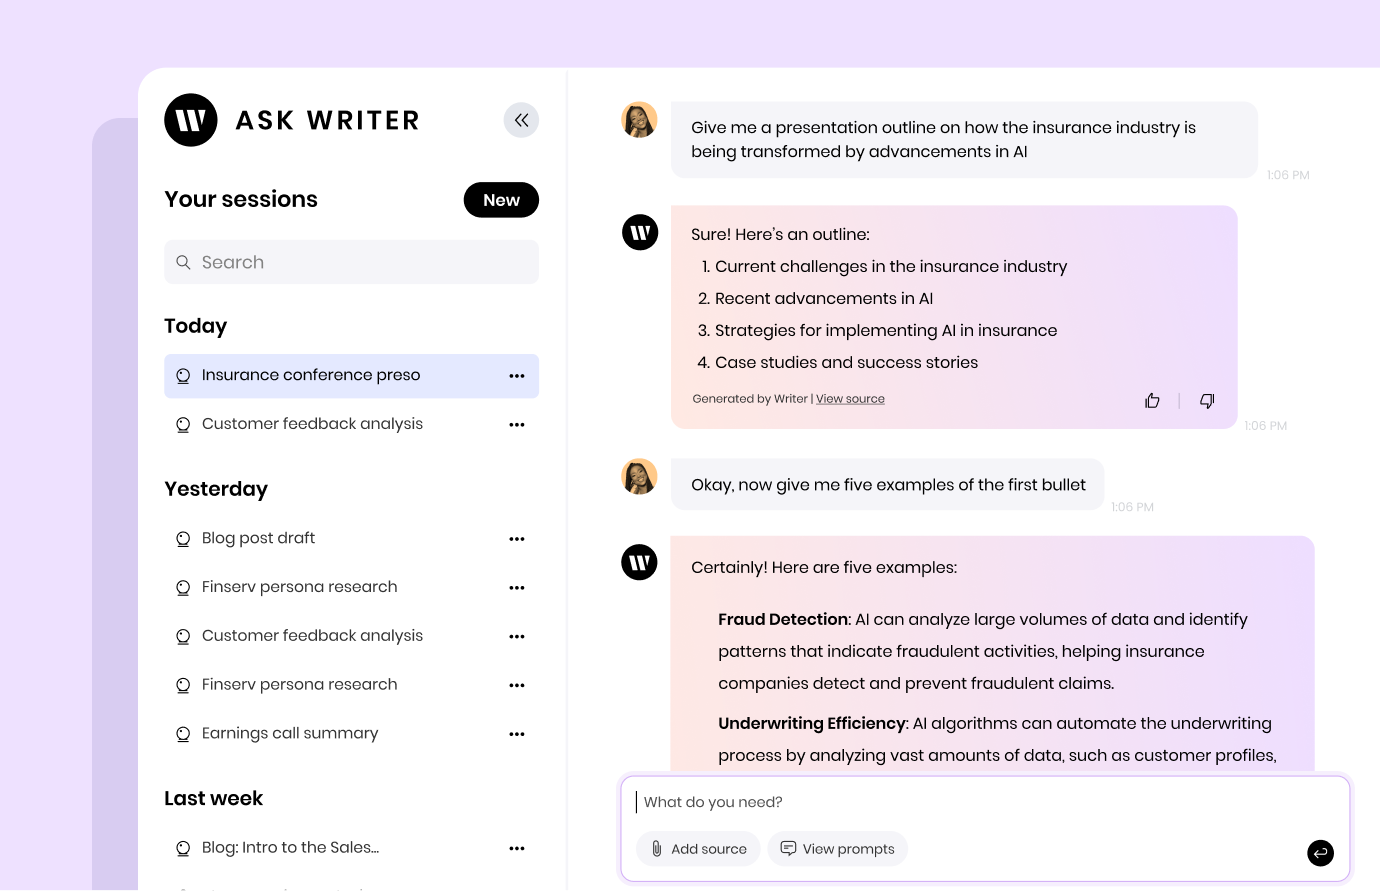 Example chat session in the new Ask Writer